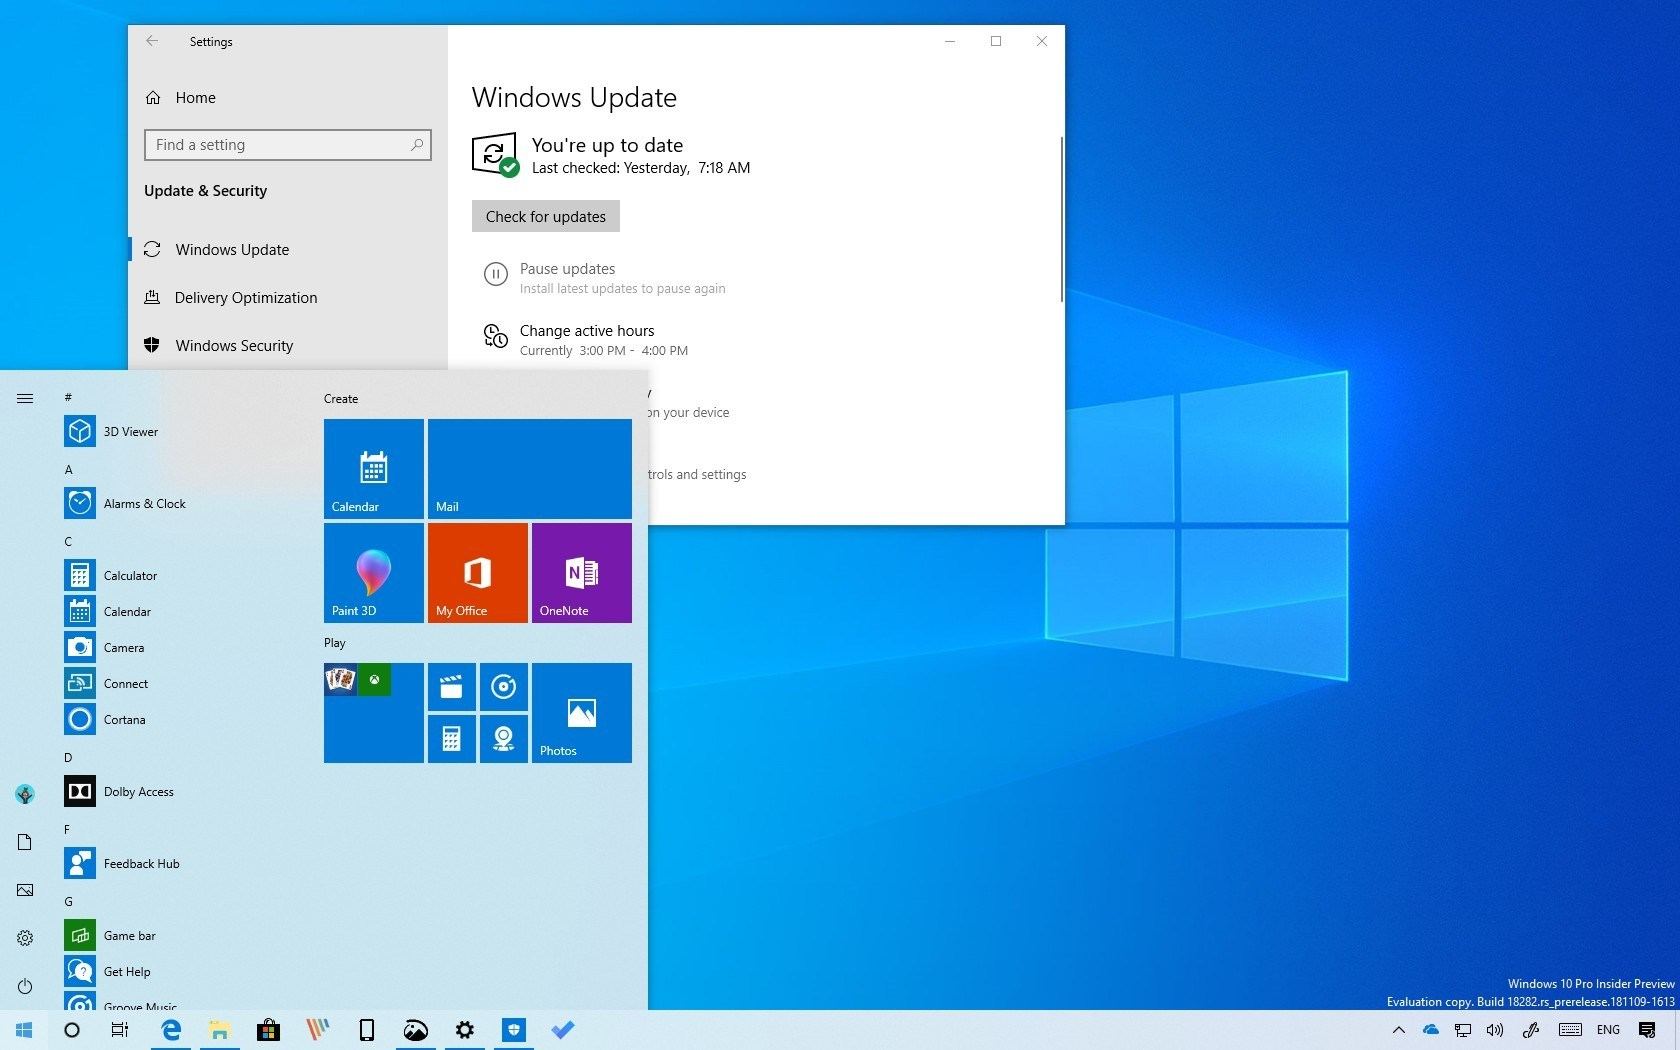 Microsoft: Windows 10 1903 is officially 'ready for broad deployment'